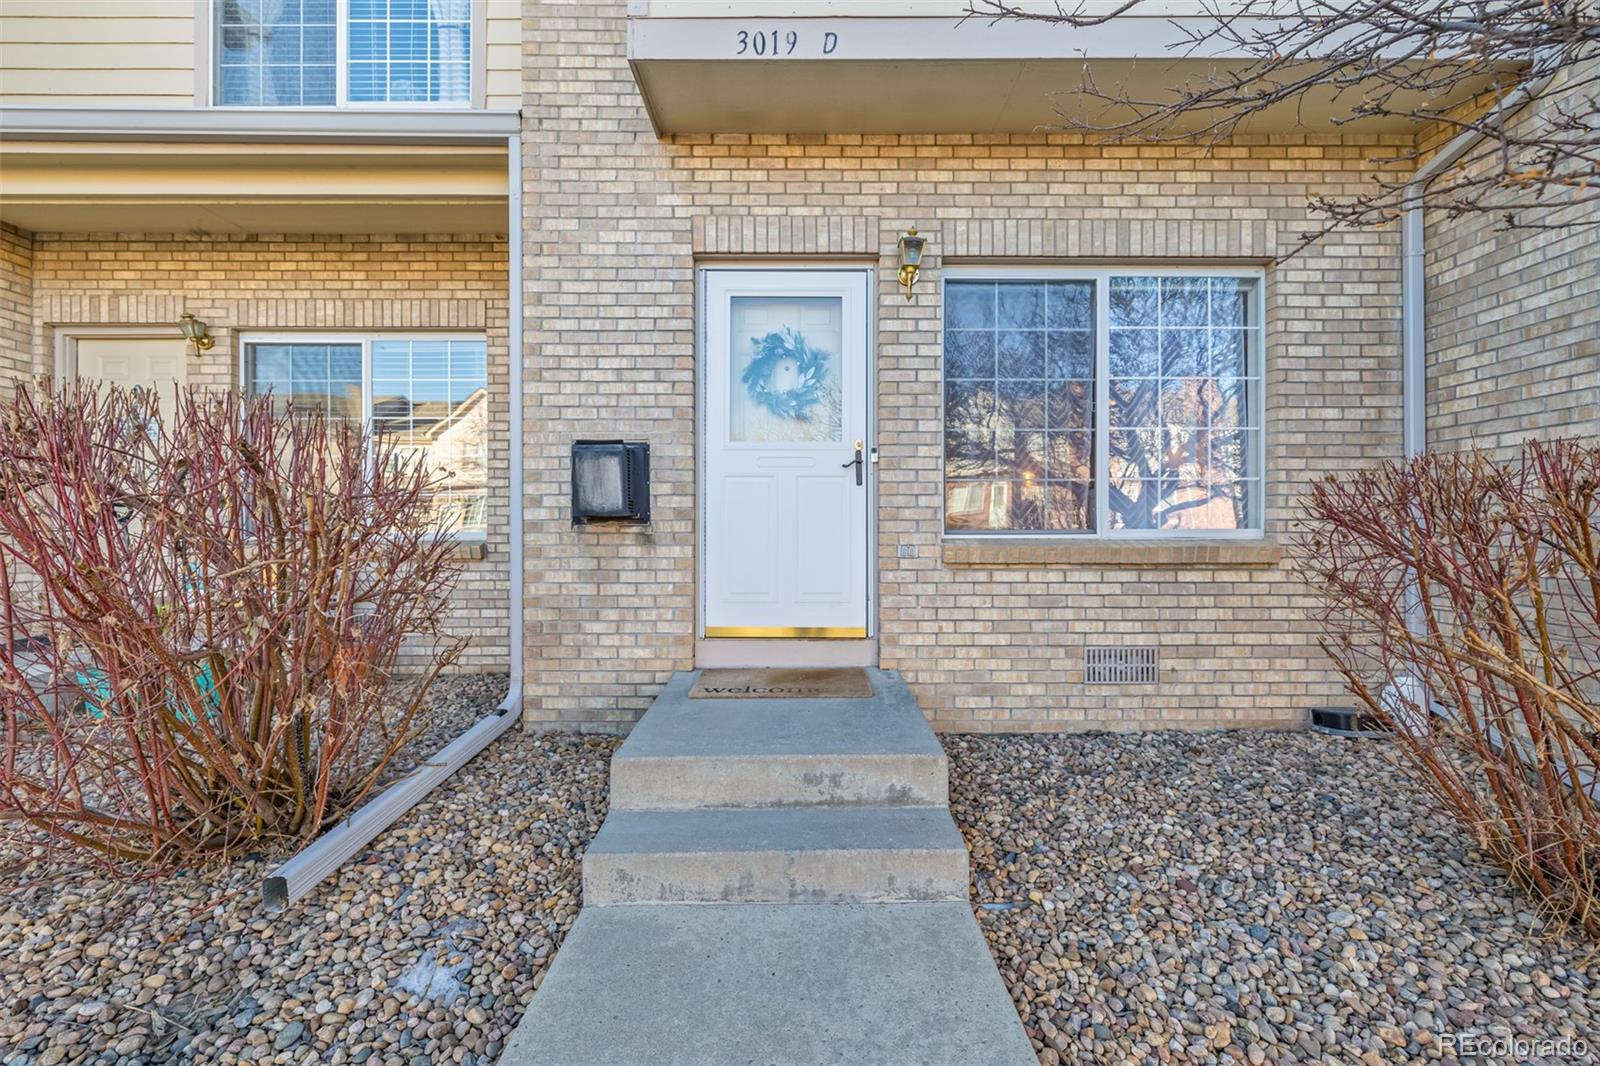 Report Image for 3019 W 107th Place,Westminster, Colorado